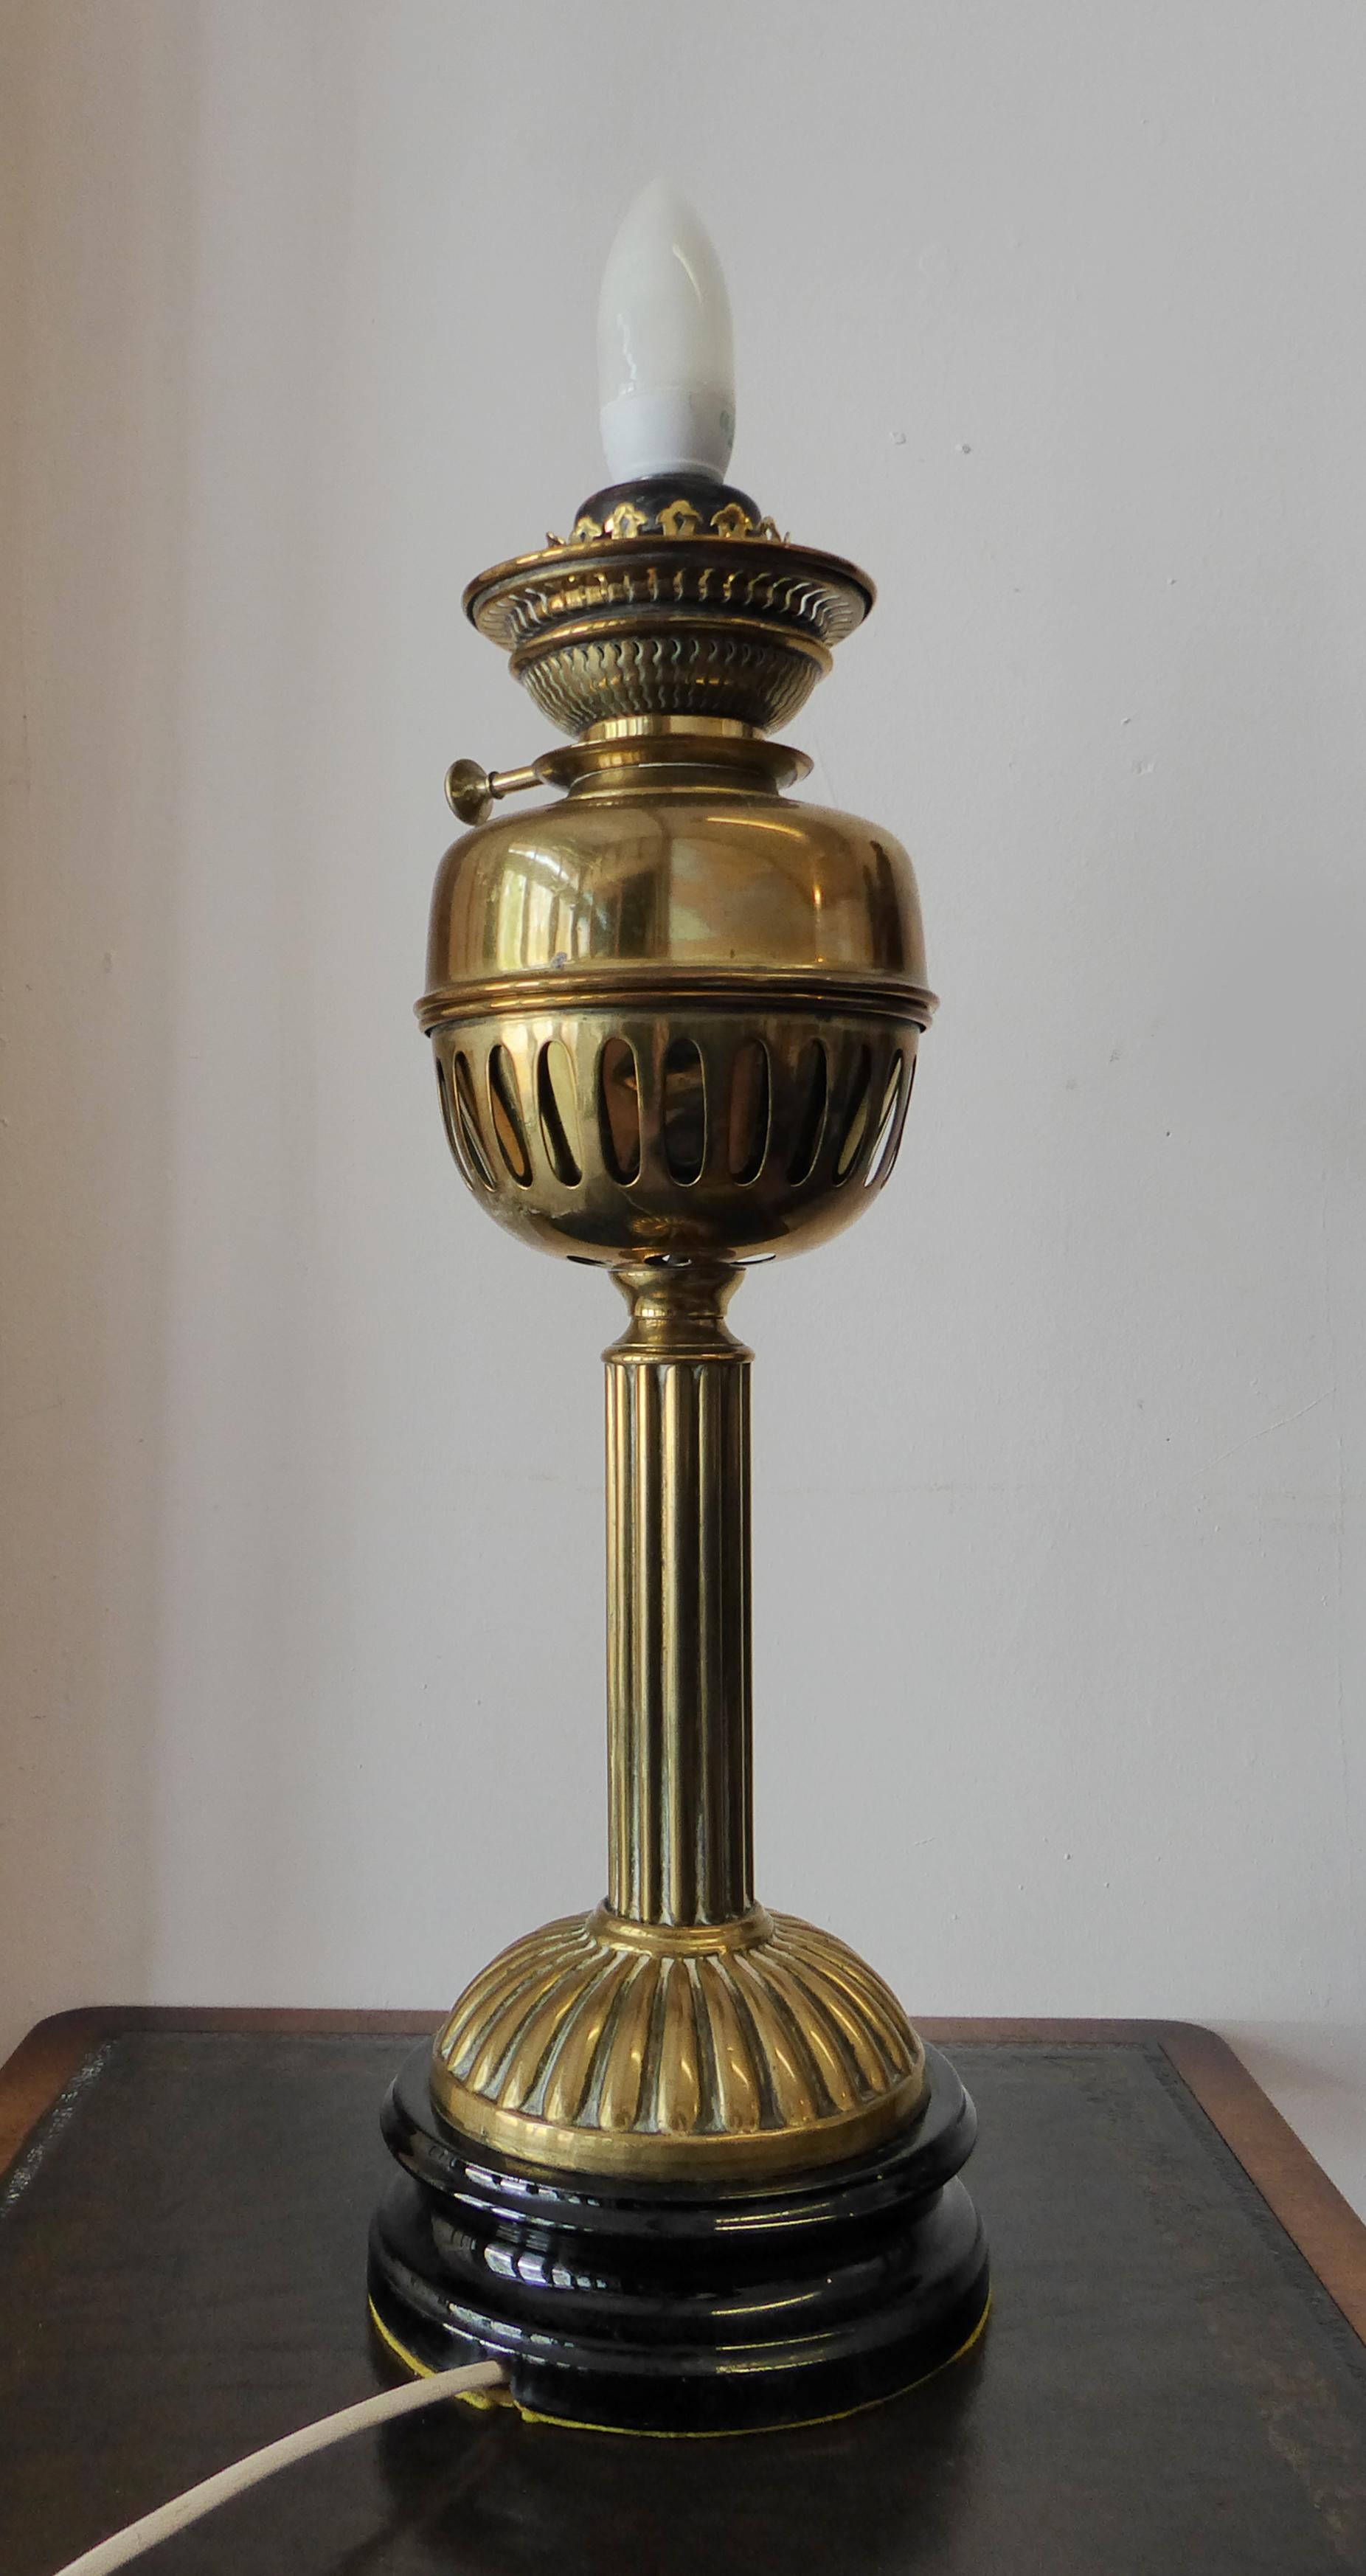 The brass column resting upon a circular brass base seated on a turned marble plinth. The original paraffin bowl and wick adjustment is all there, and if one wished to re-convert it back to the electricity this could be readily done.
with an